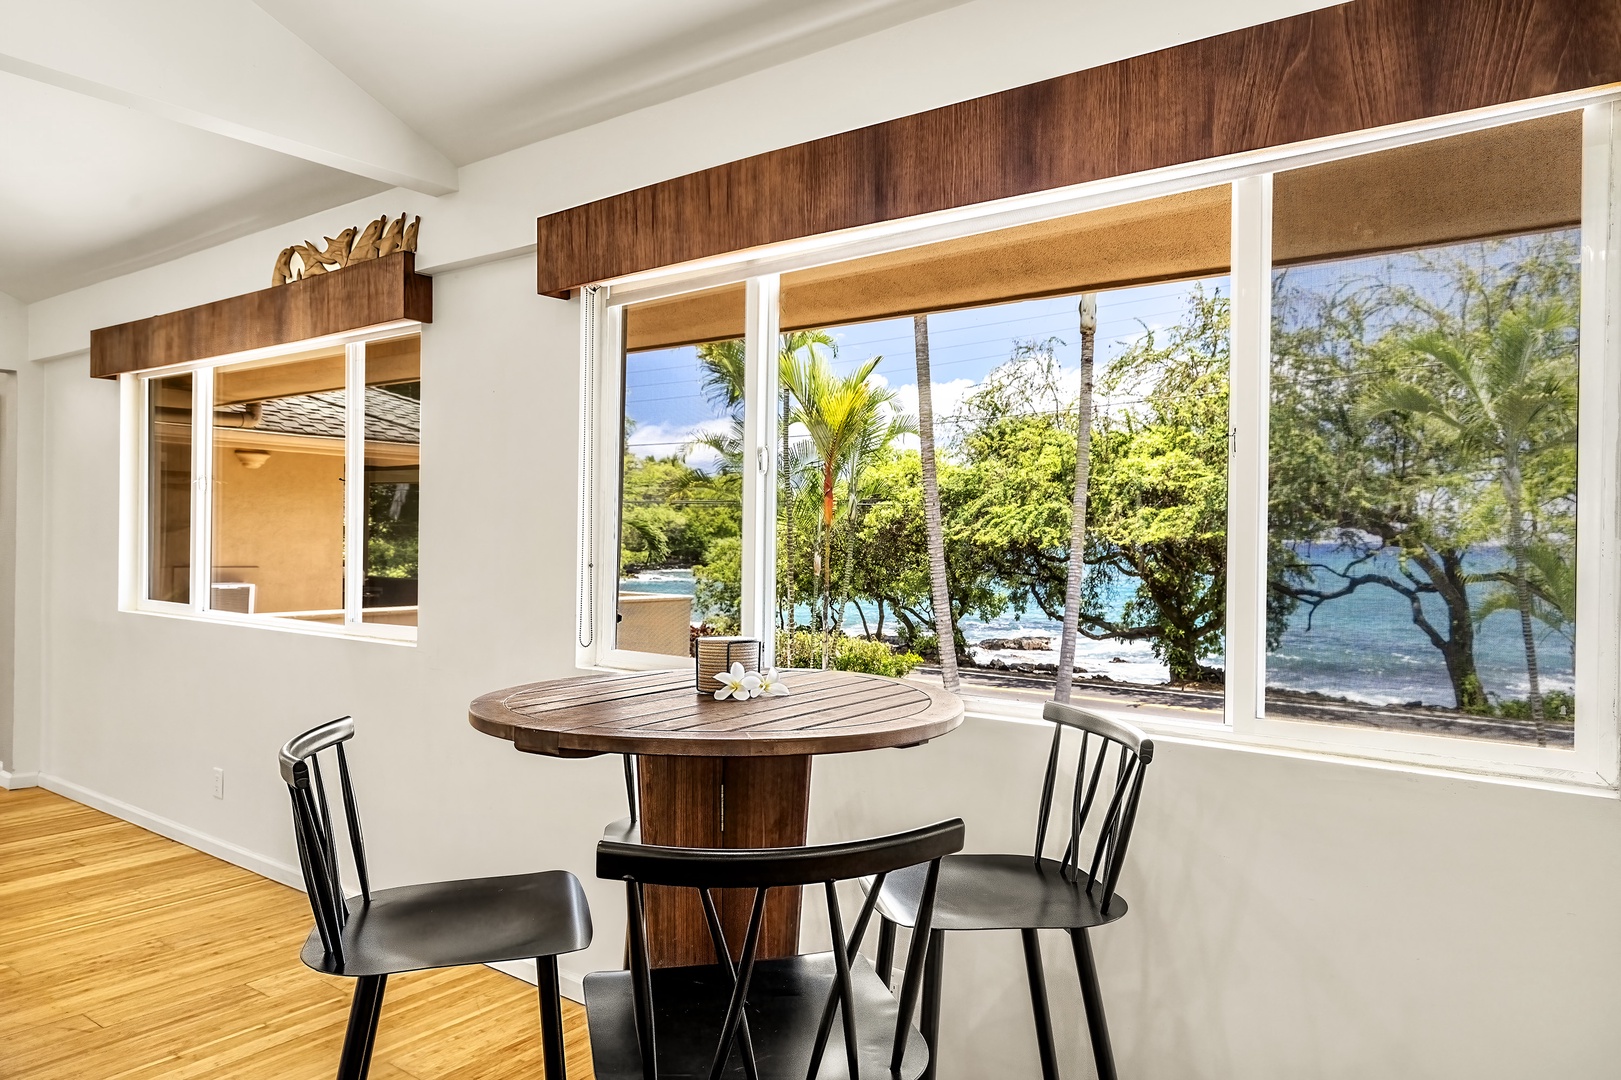 Kailua Kona Vacation Rentals, Lymans Bay Hale - Sit at the bistro table to observe the games and ocean activity